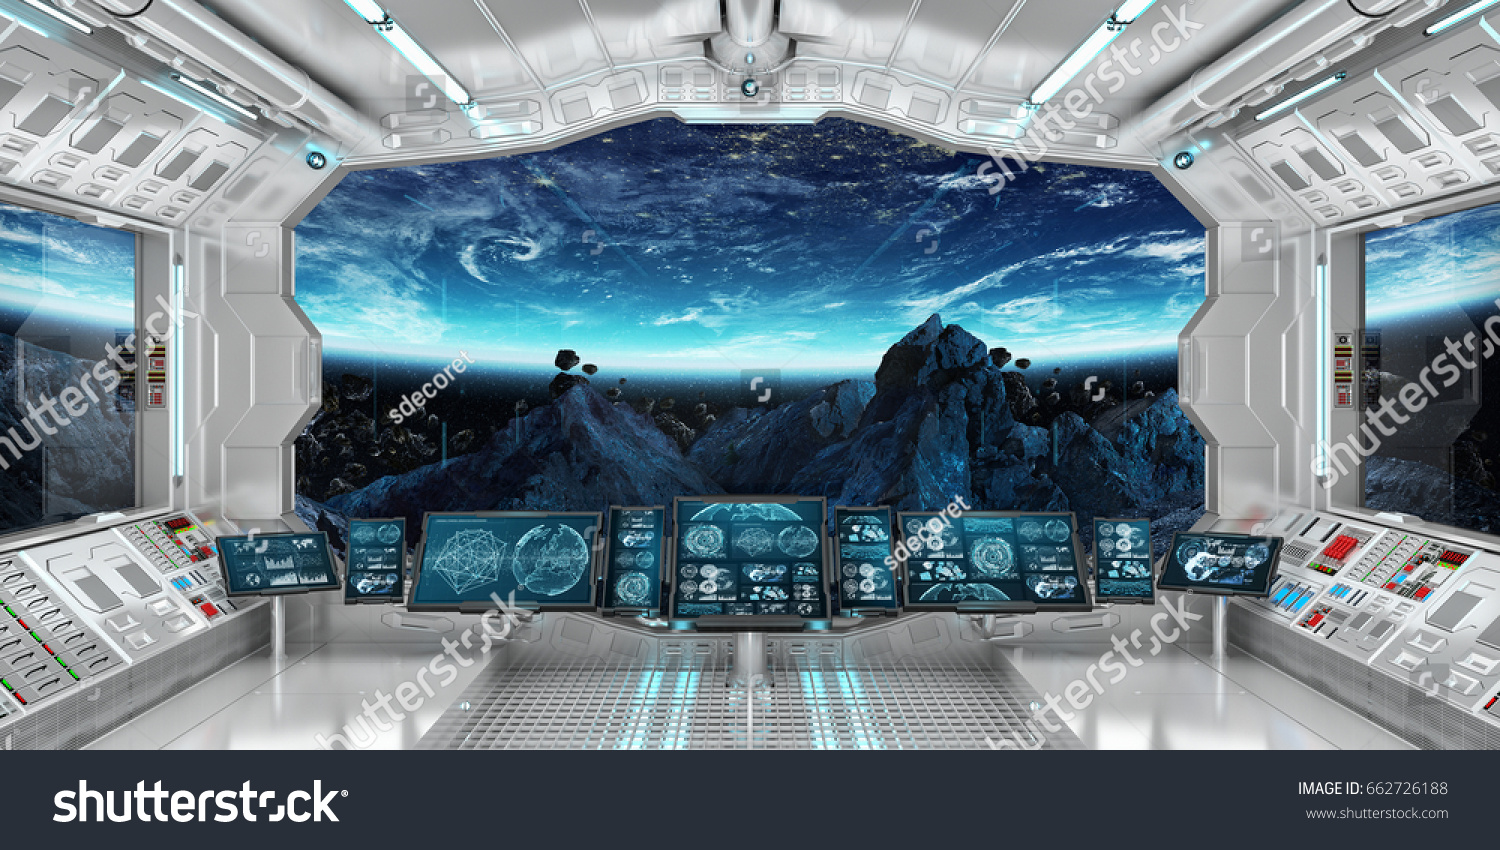 Spaceship Interior View On Space Planet Stockillustration